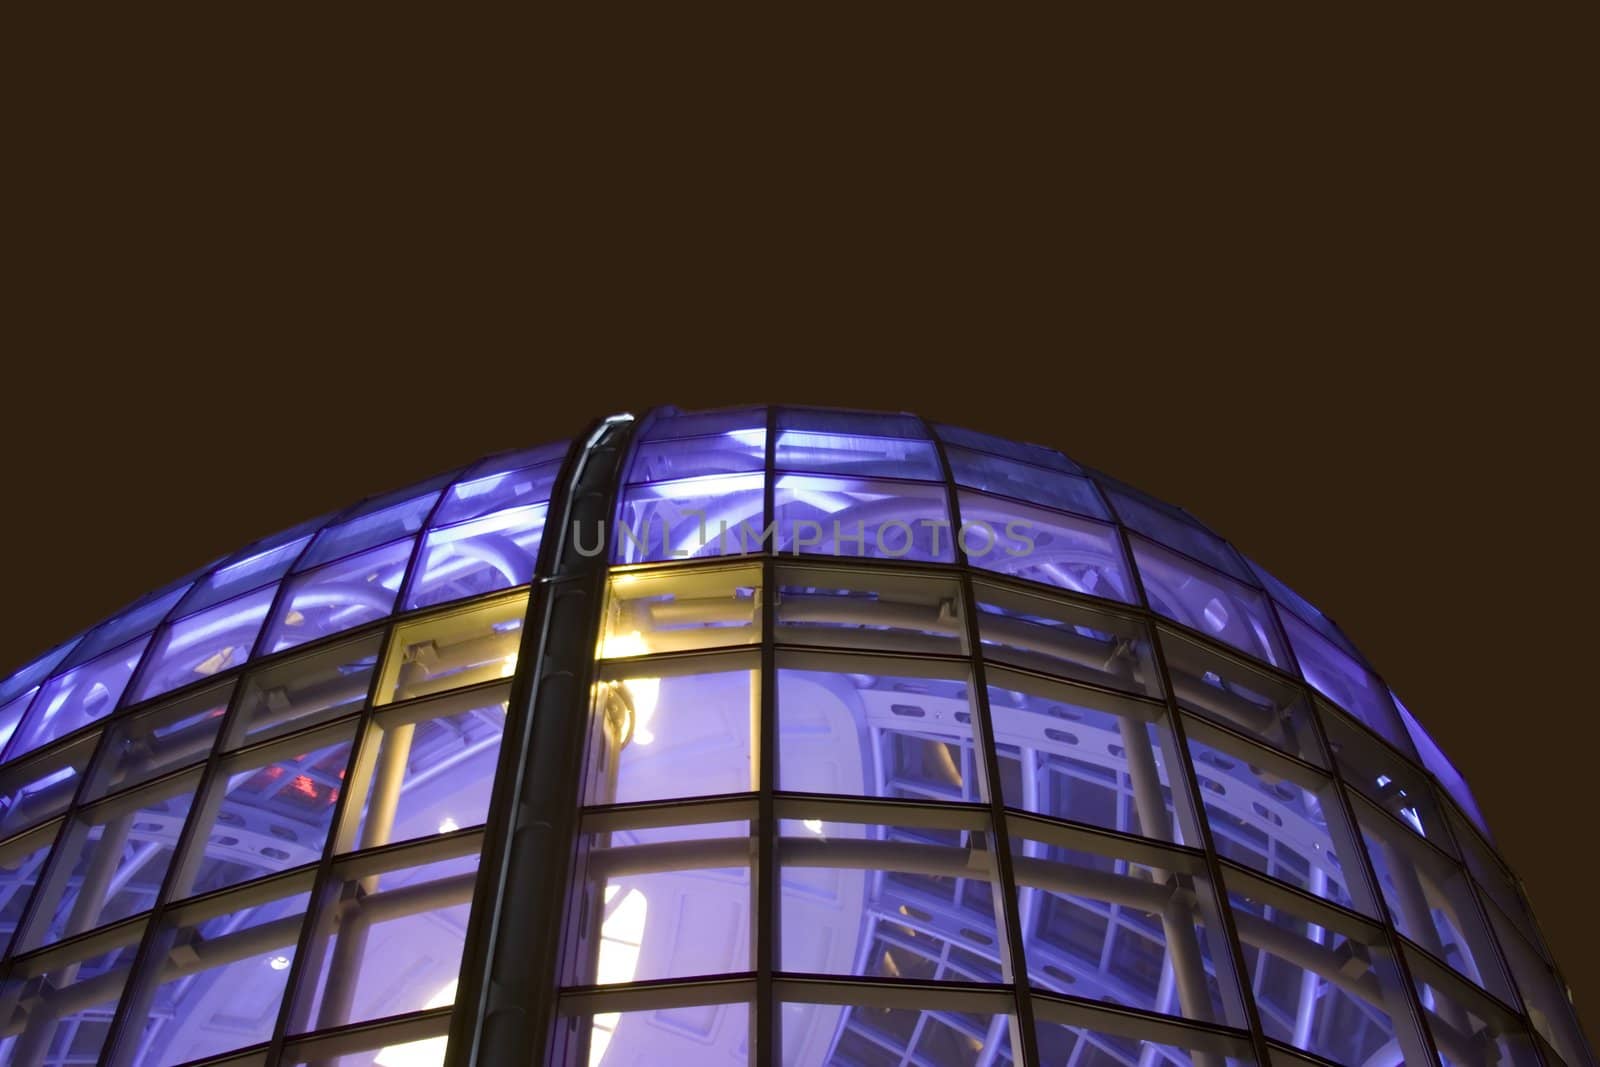 Night shot of glass office building window glass lit with blue purple light room for type above building